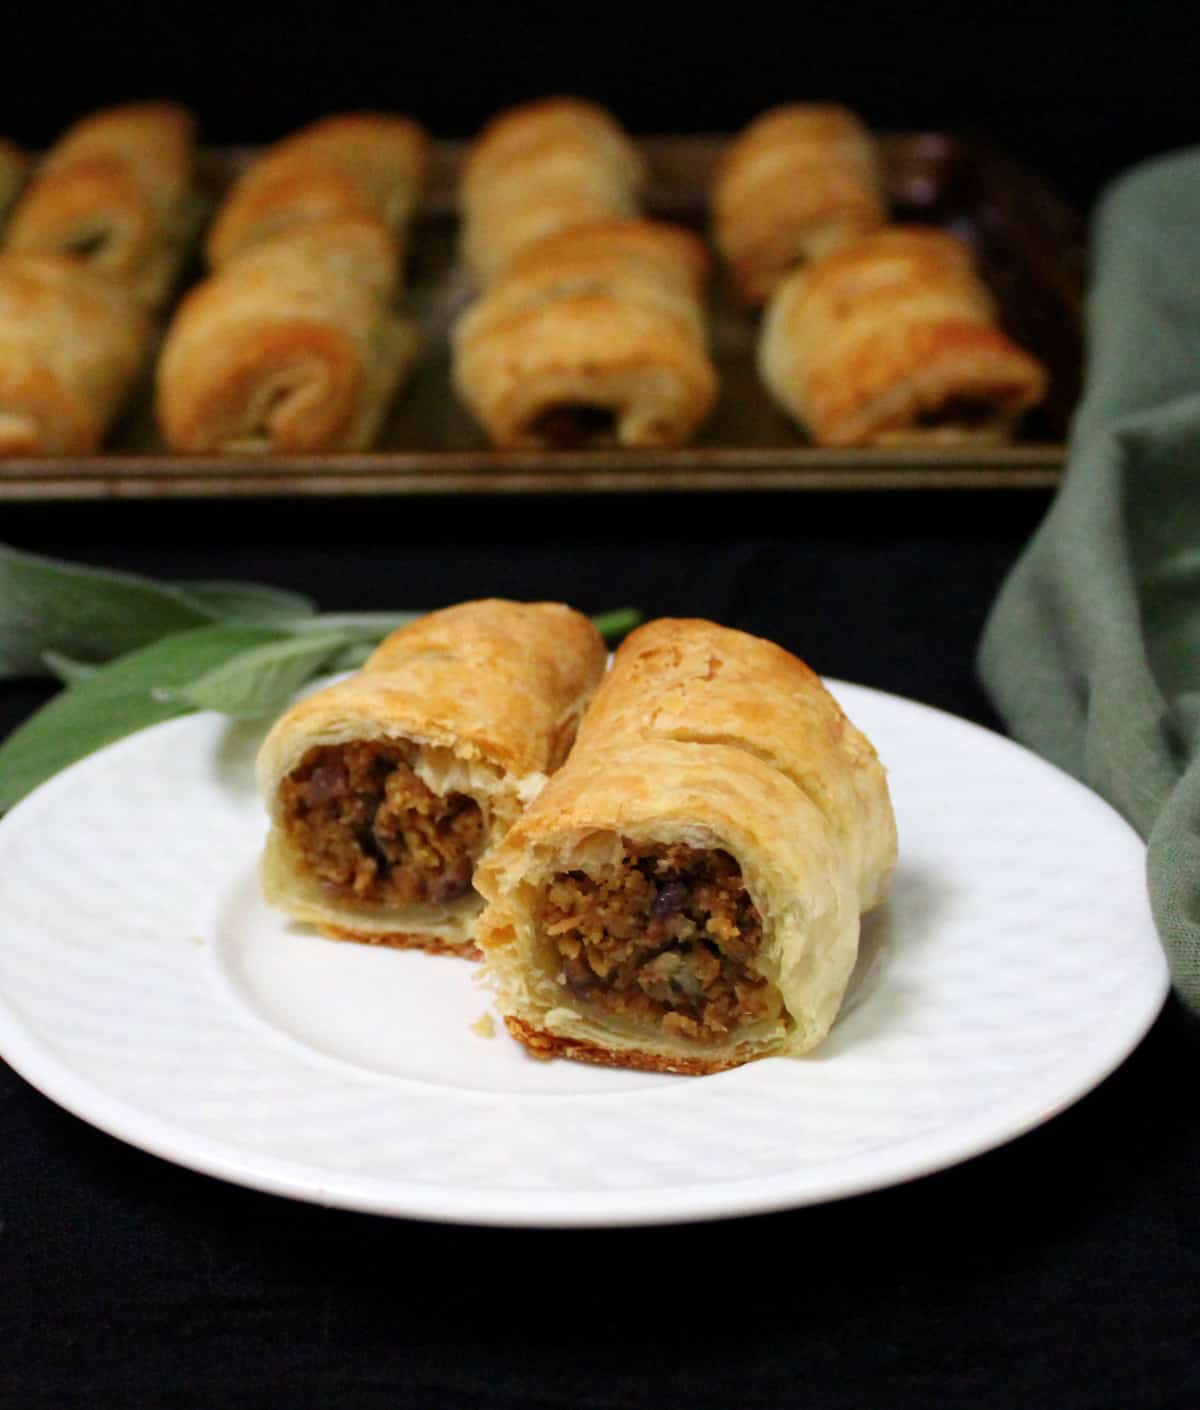 A sliced sausage roll on a white plate in the foreground with more sausage rolls on a baking sheet in the back against a black background